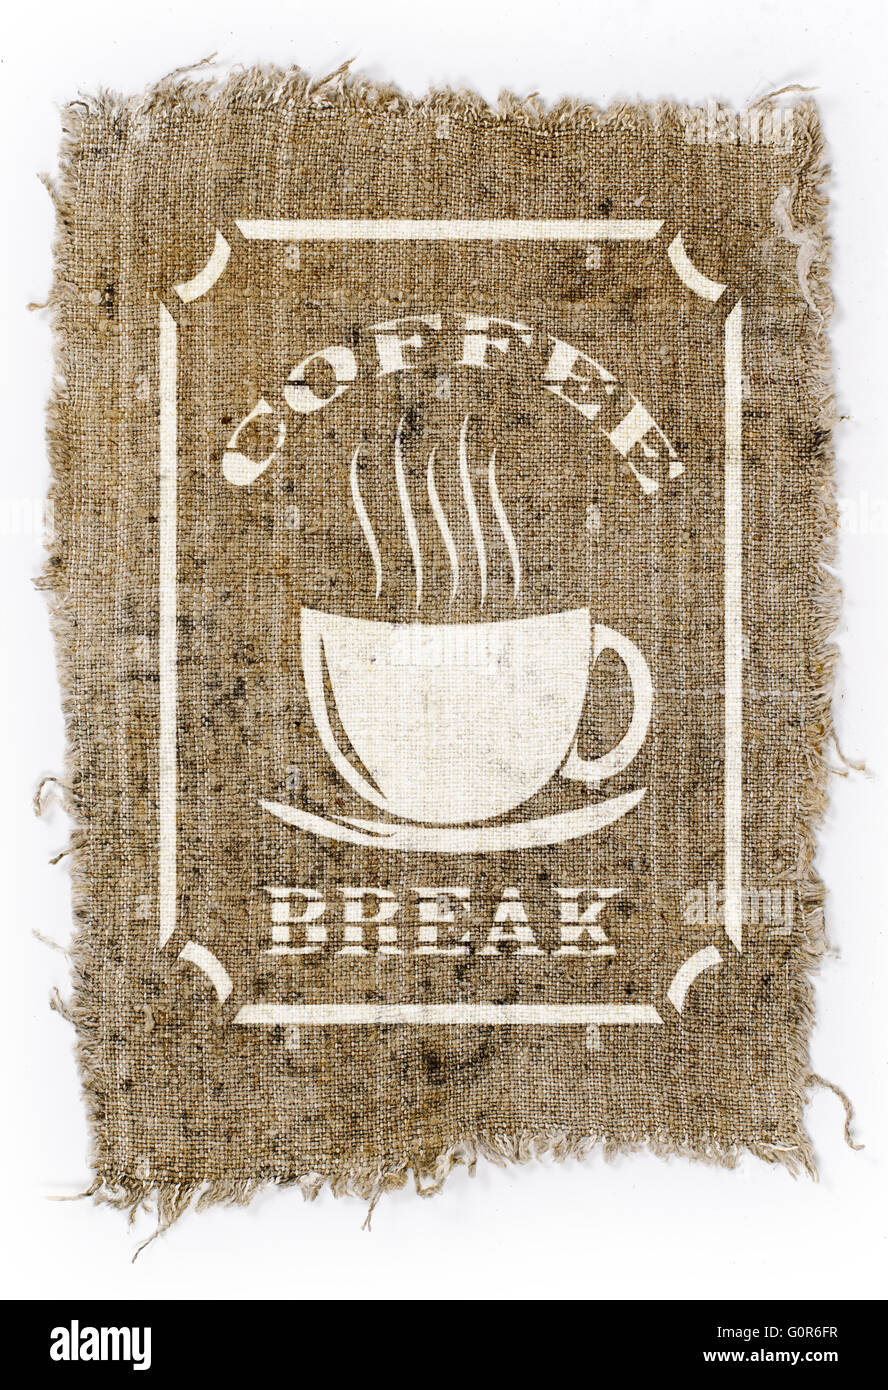 old canvas painted Cup and says 'Coffee break' Stock Photo